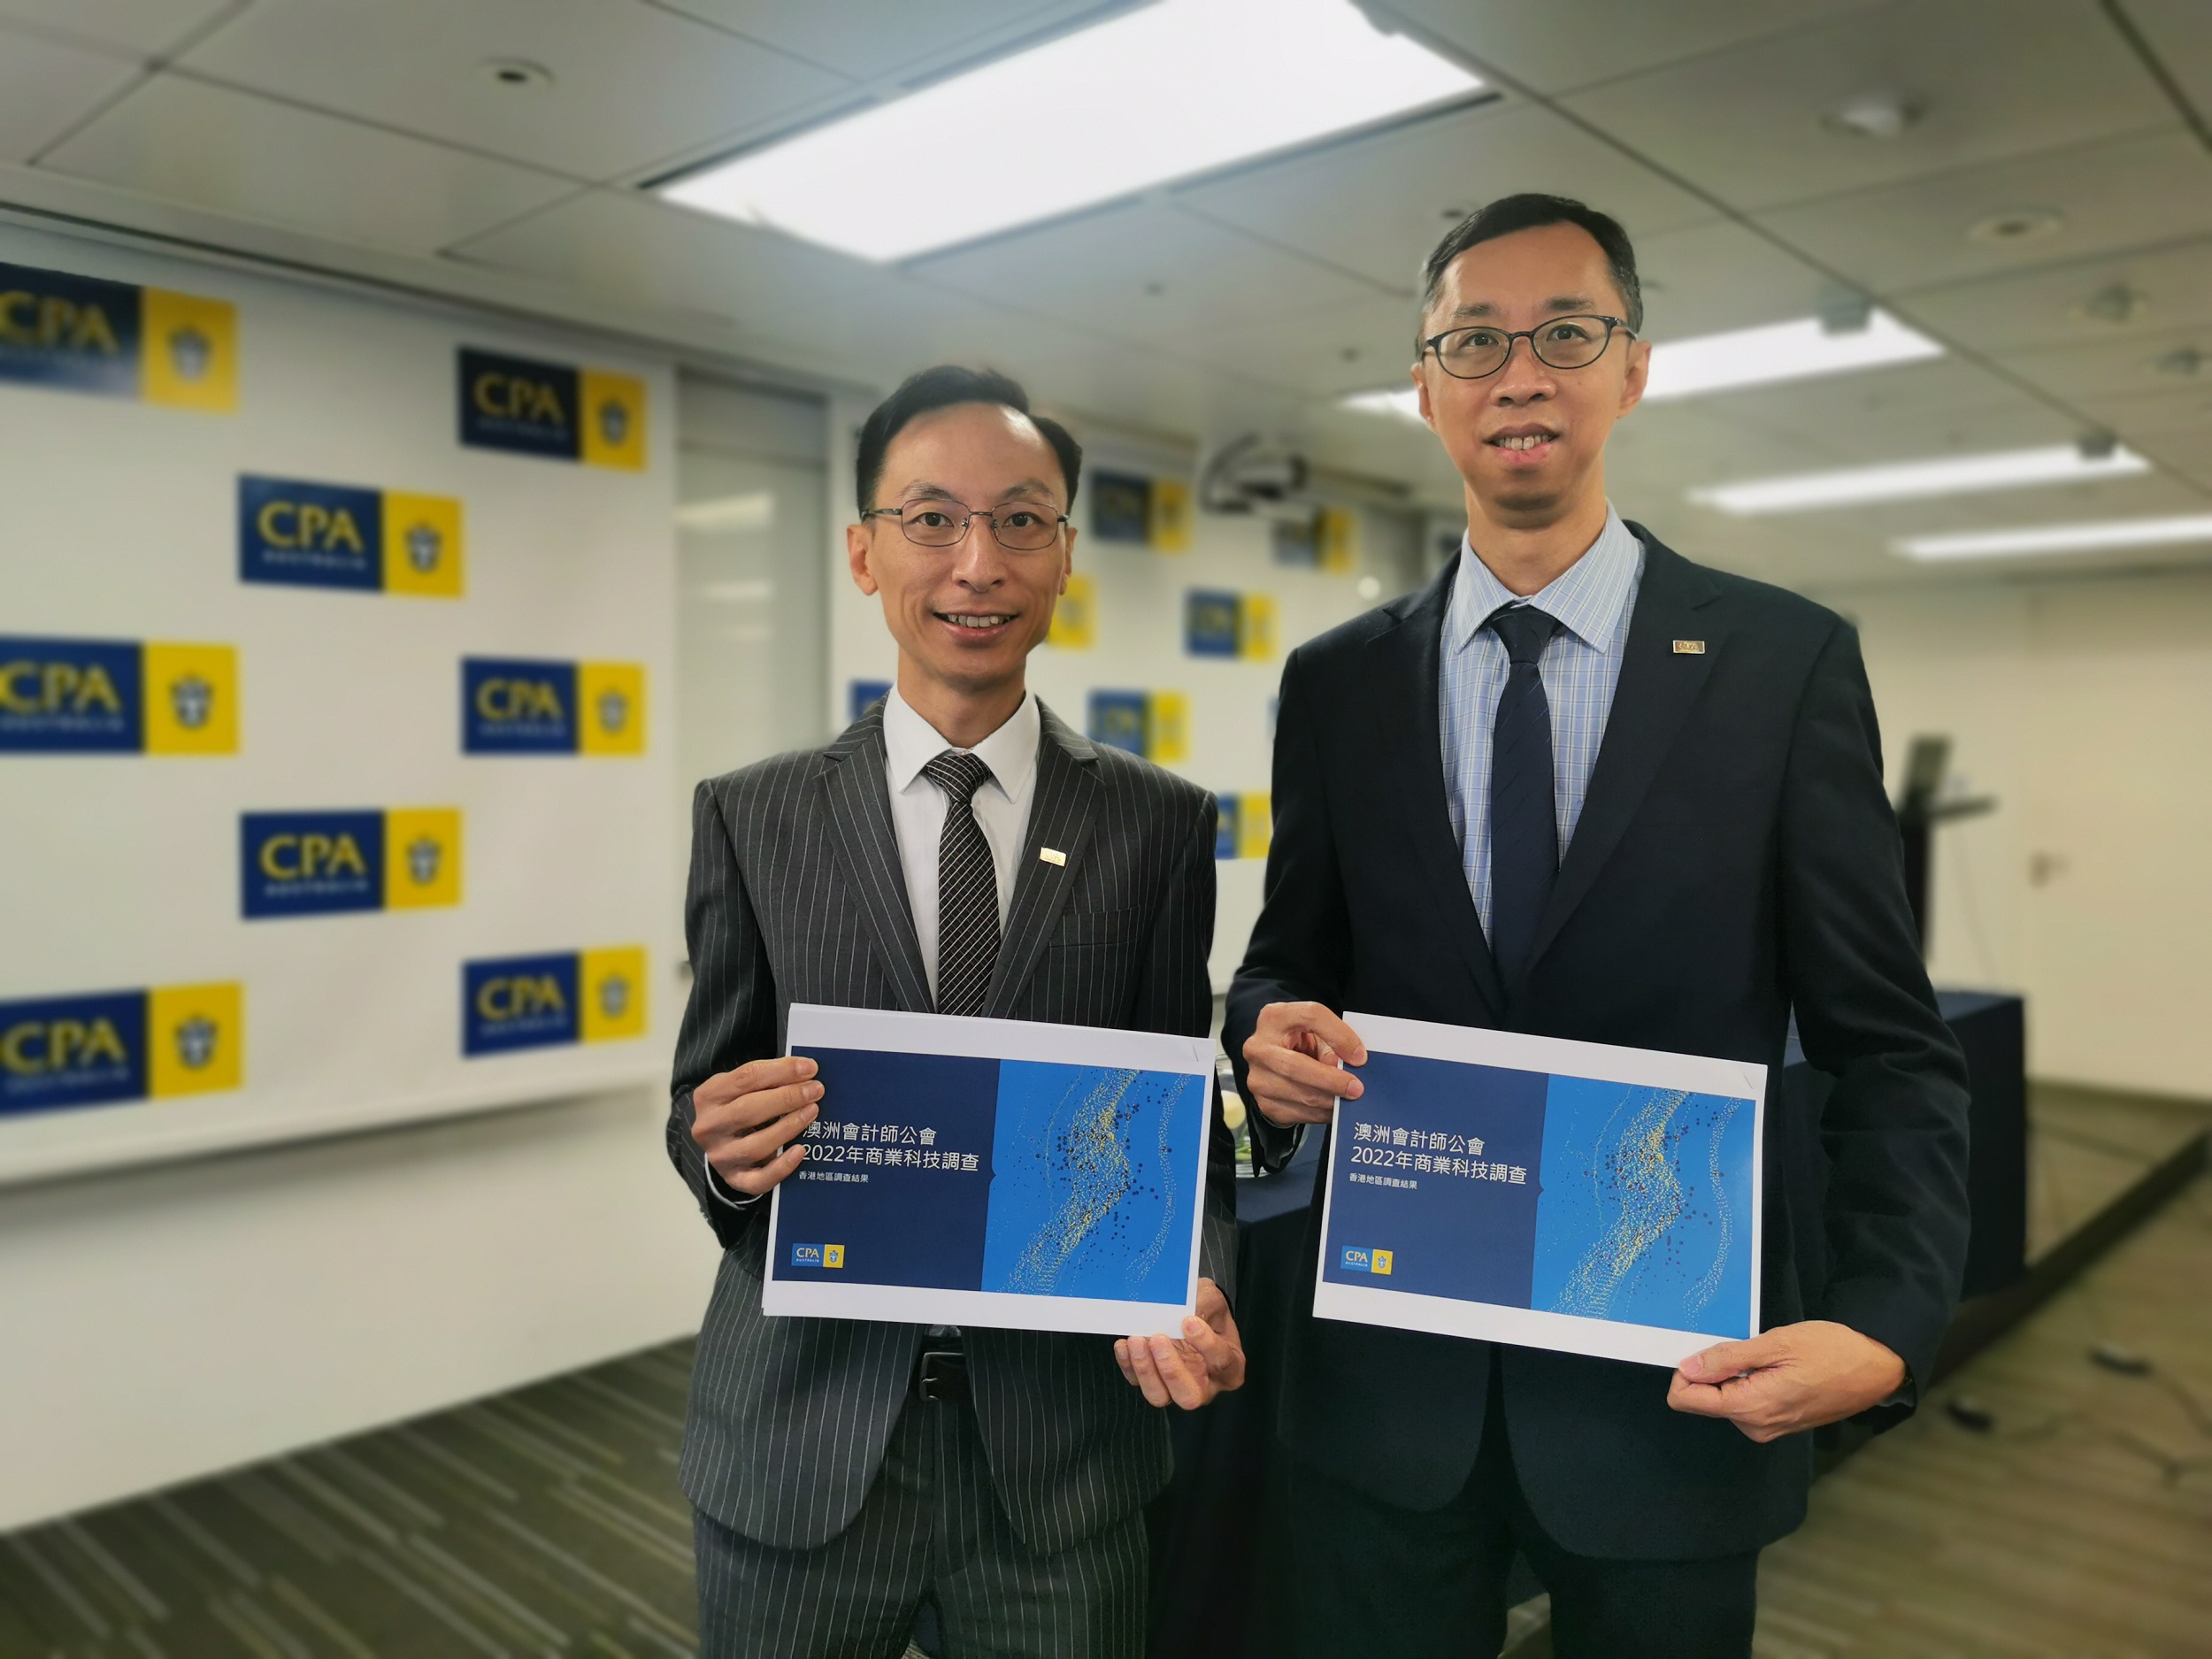 (from left to right) Dr Paul Sin and Dr Albert Wong, members of CPA Australia’s Greater Bay Area (GBA) Committee